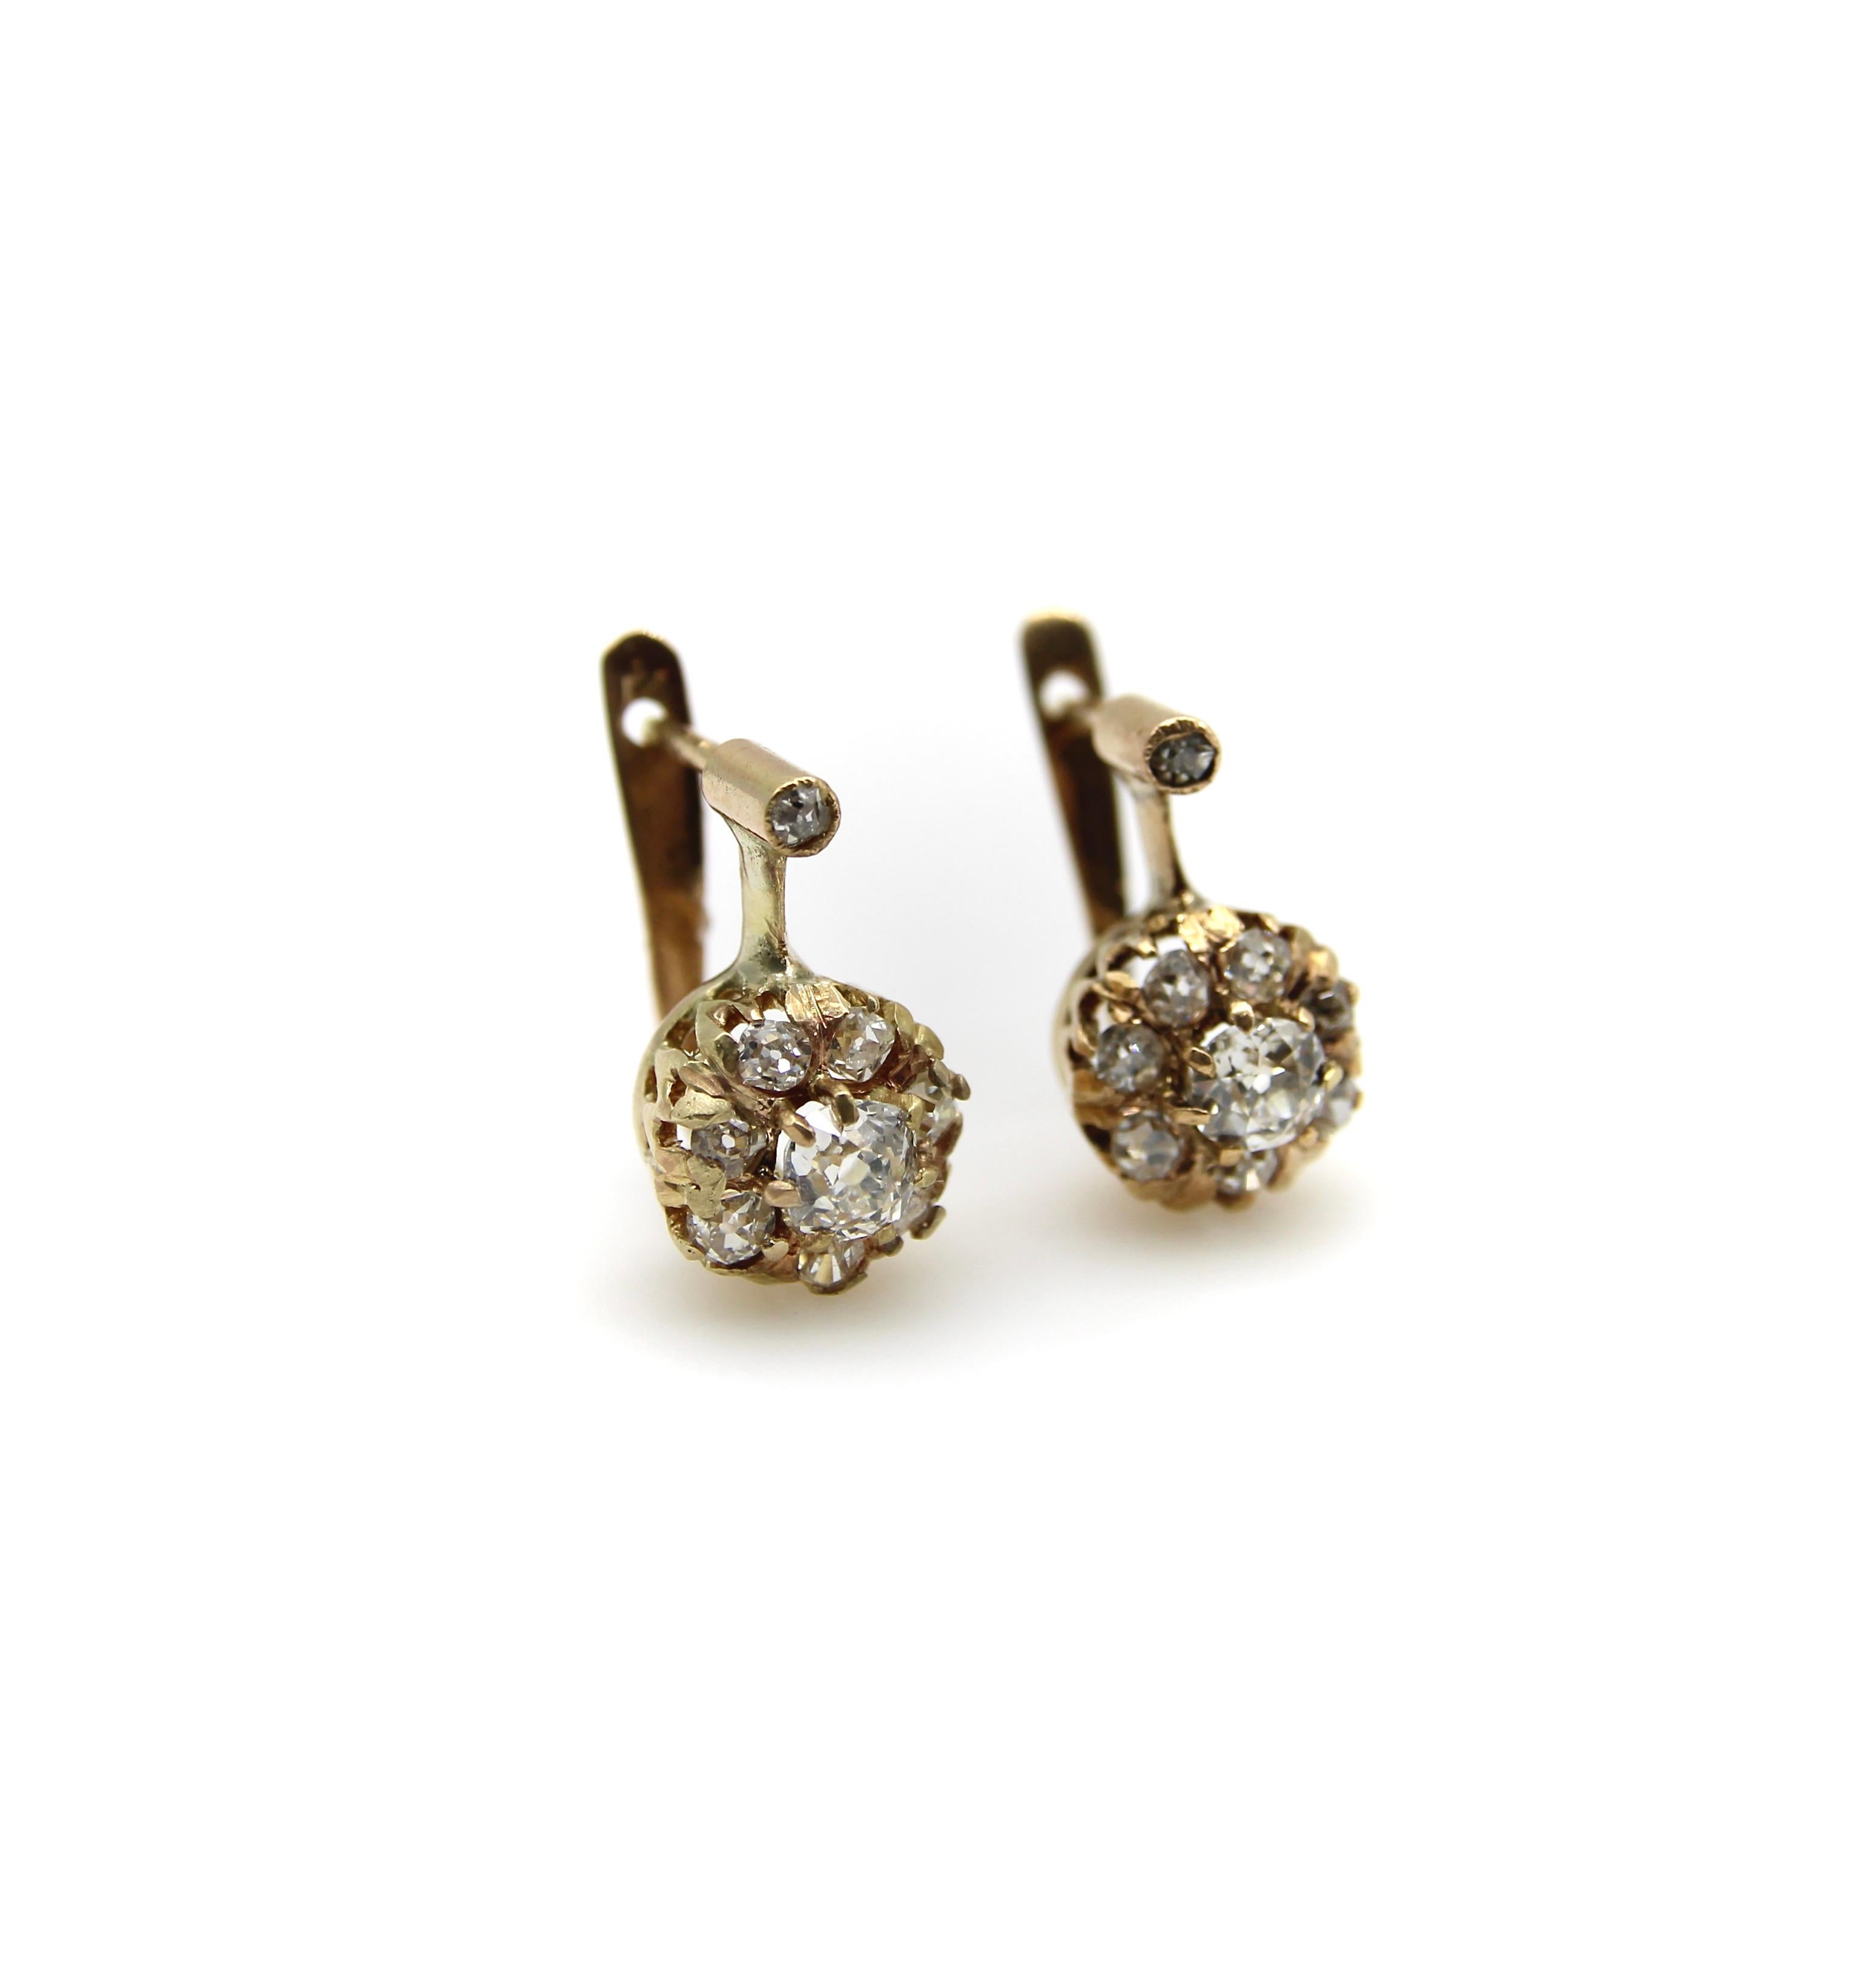 These delicately crafted 18k gold Victorian earrings feature Old Mine Cut diamonds carefully prong set into the shape of a flower. Combined, these sparkly earrings contain over a carat of diamonds, and the handcrafted details of these earrings make